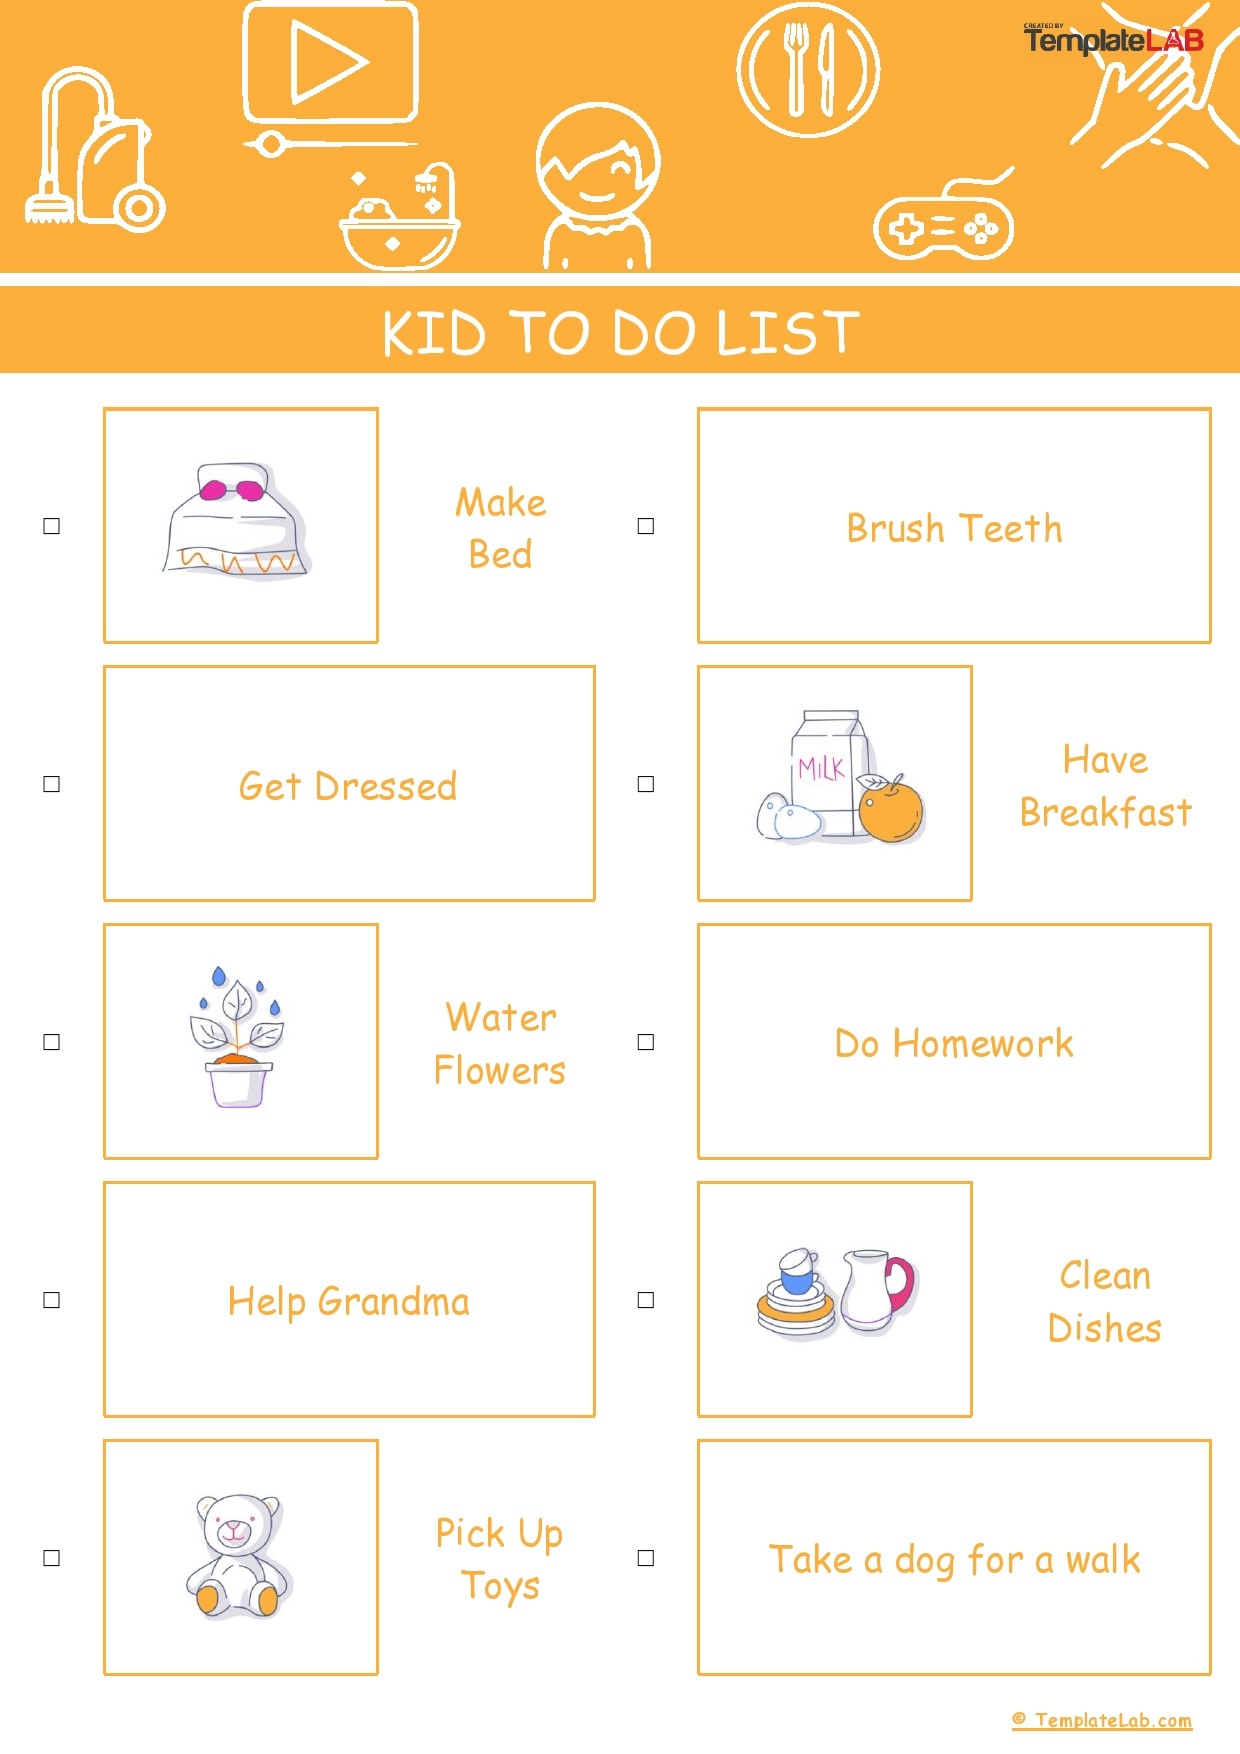 Free Kid To Do List Template